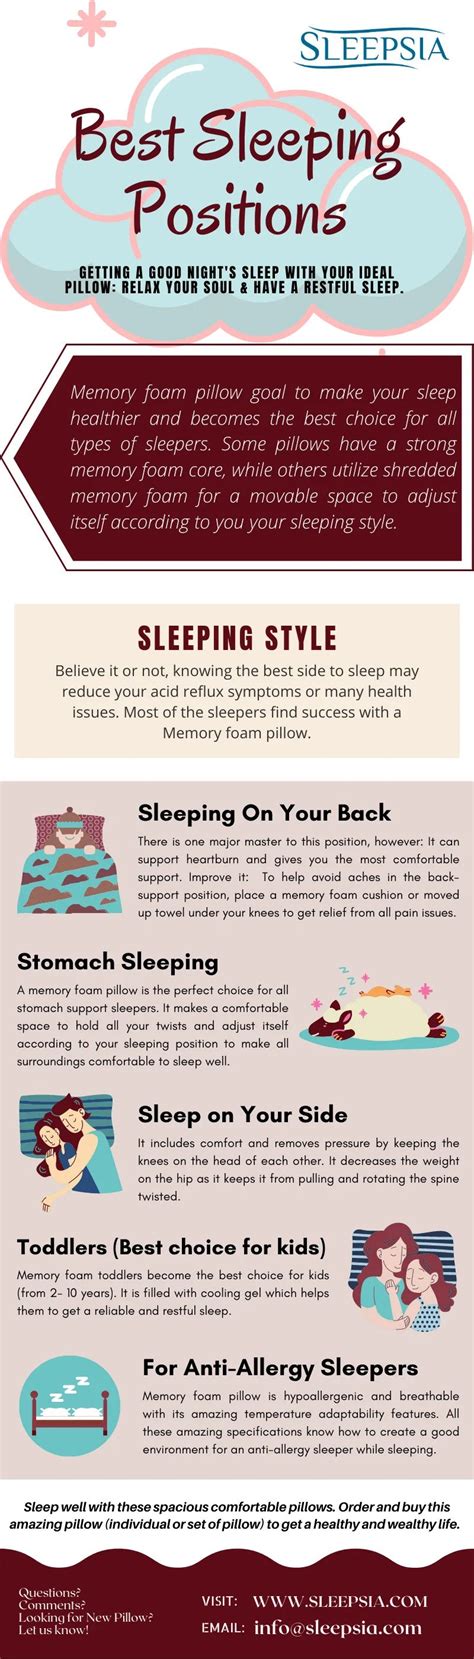 Best Sleeping Positions For Everyone Infographic Plaza